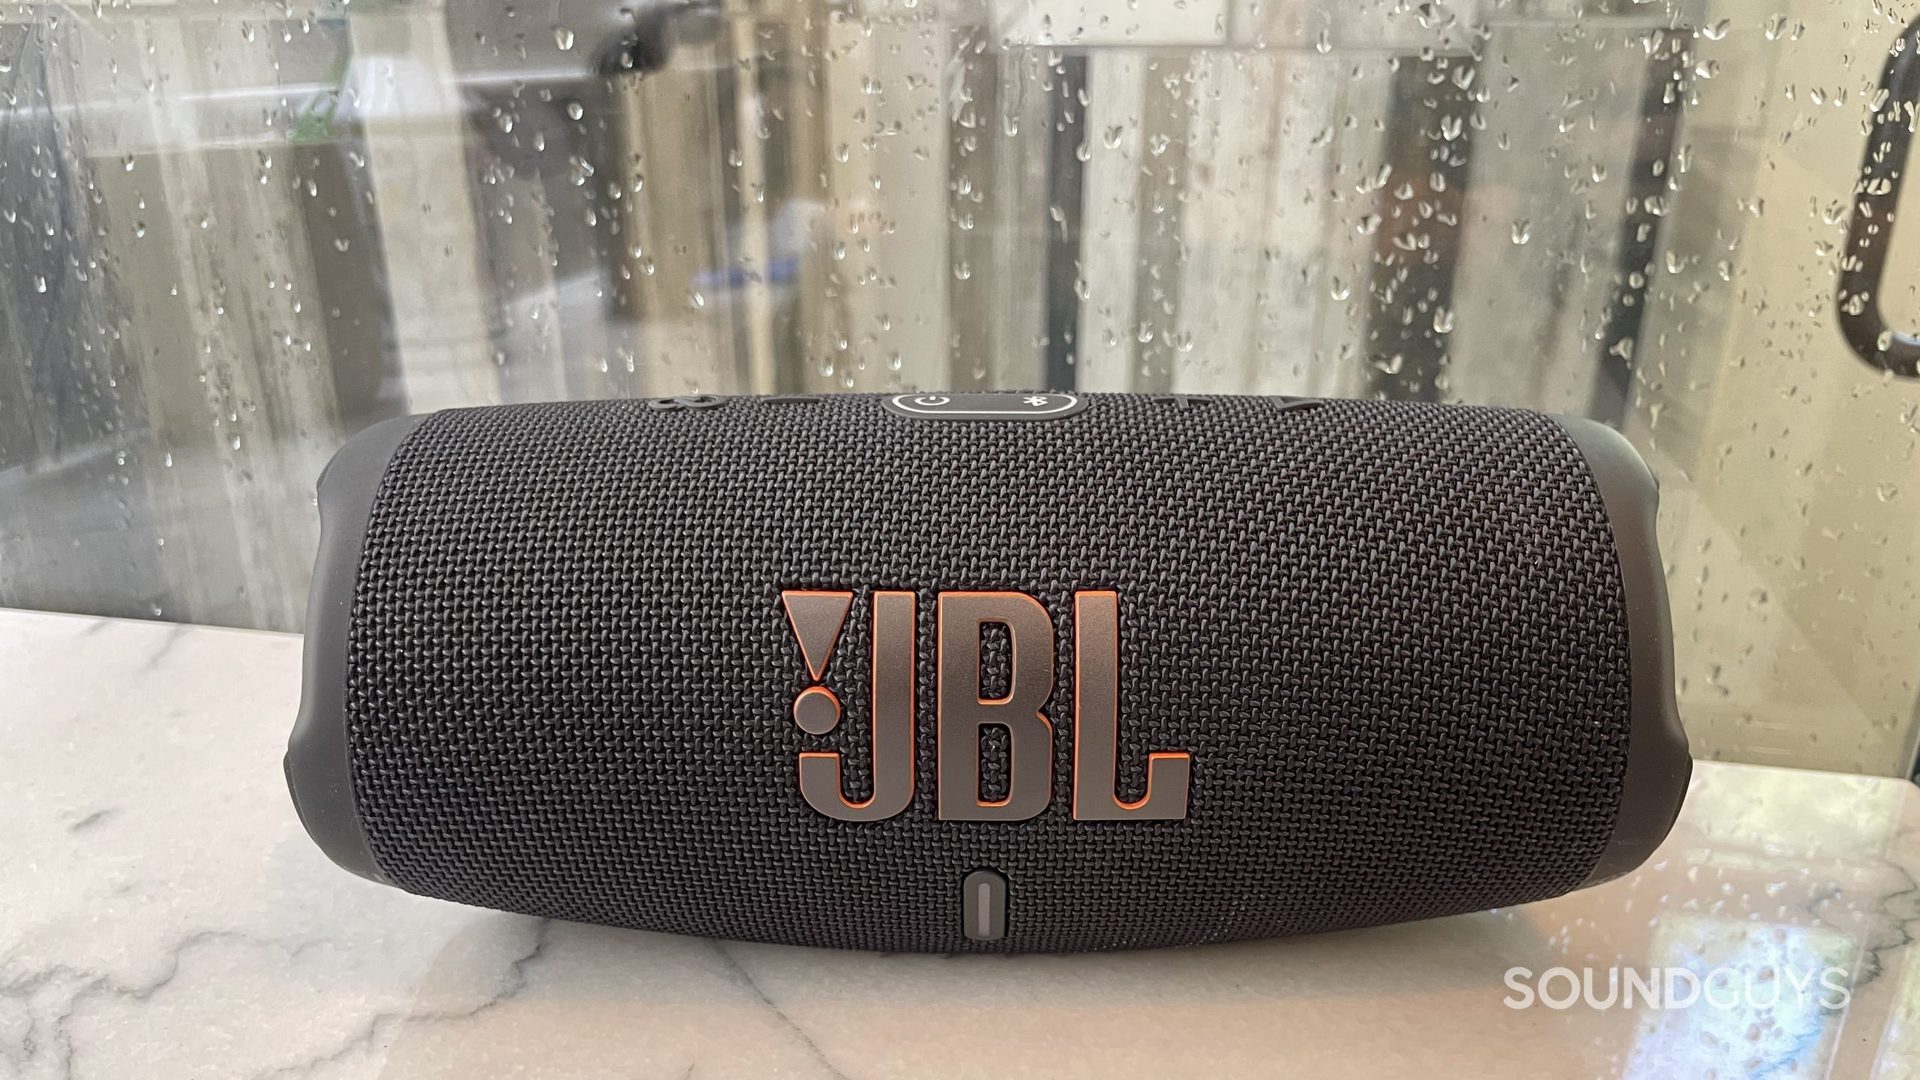 The JBL Charge 5 Bluetooth speaker rests on a countertop with rain drops on a window behind it.